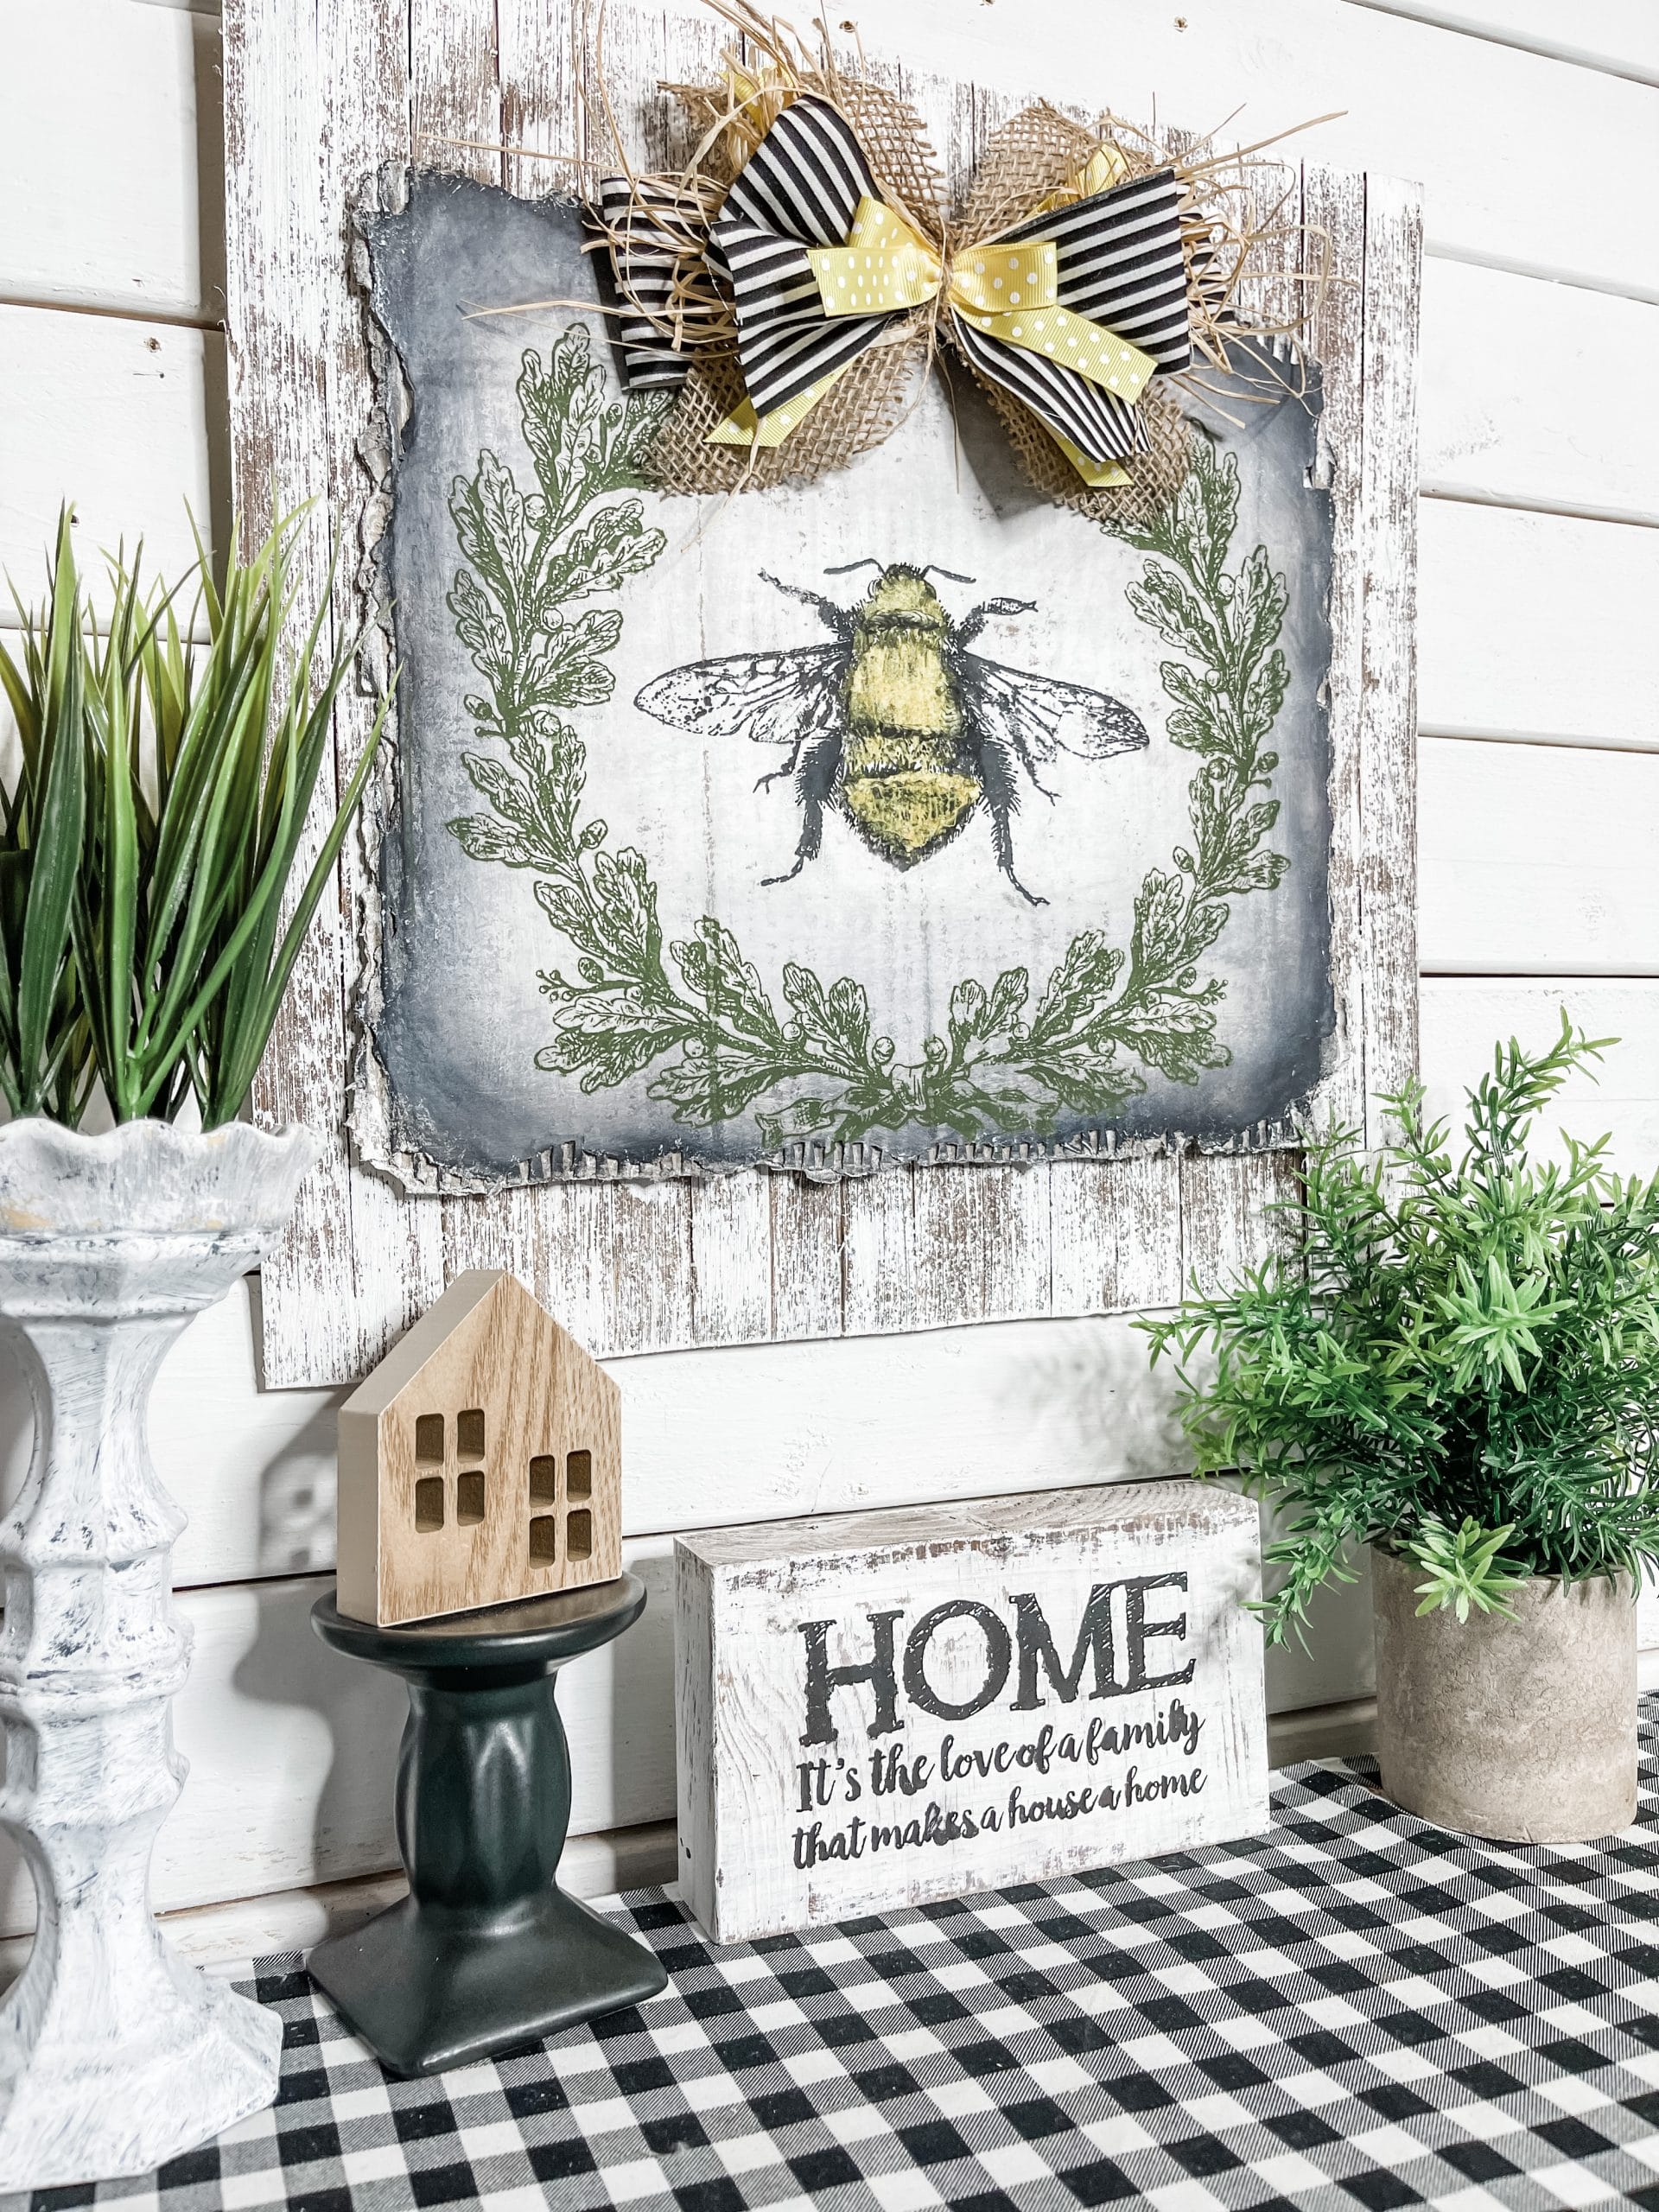 Bee Decor Bumble Bee Decorations for Home Bee Hive Decor Honey Bee